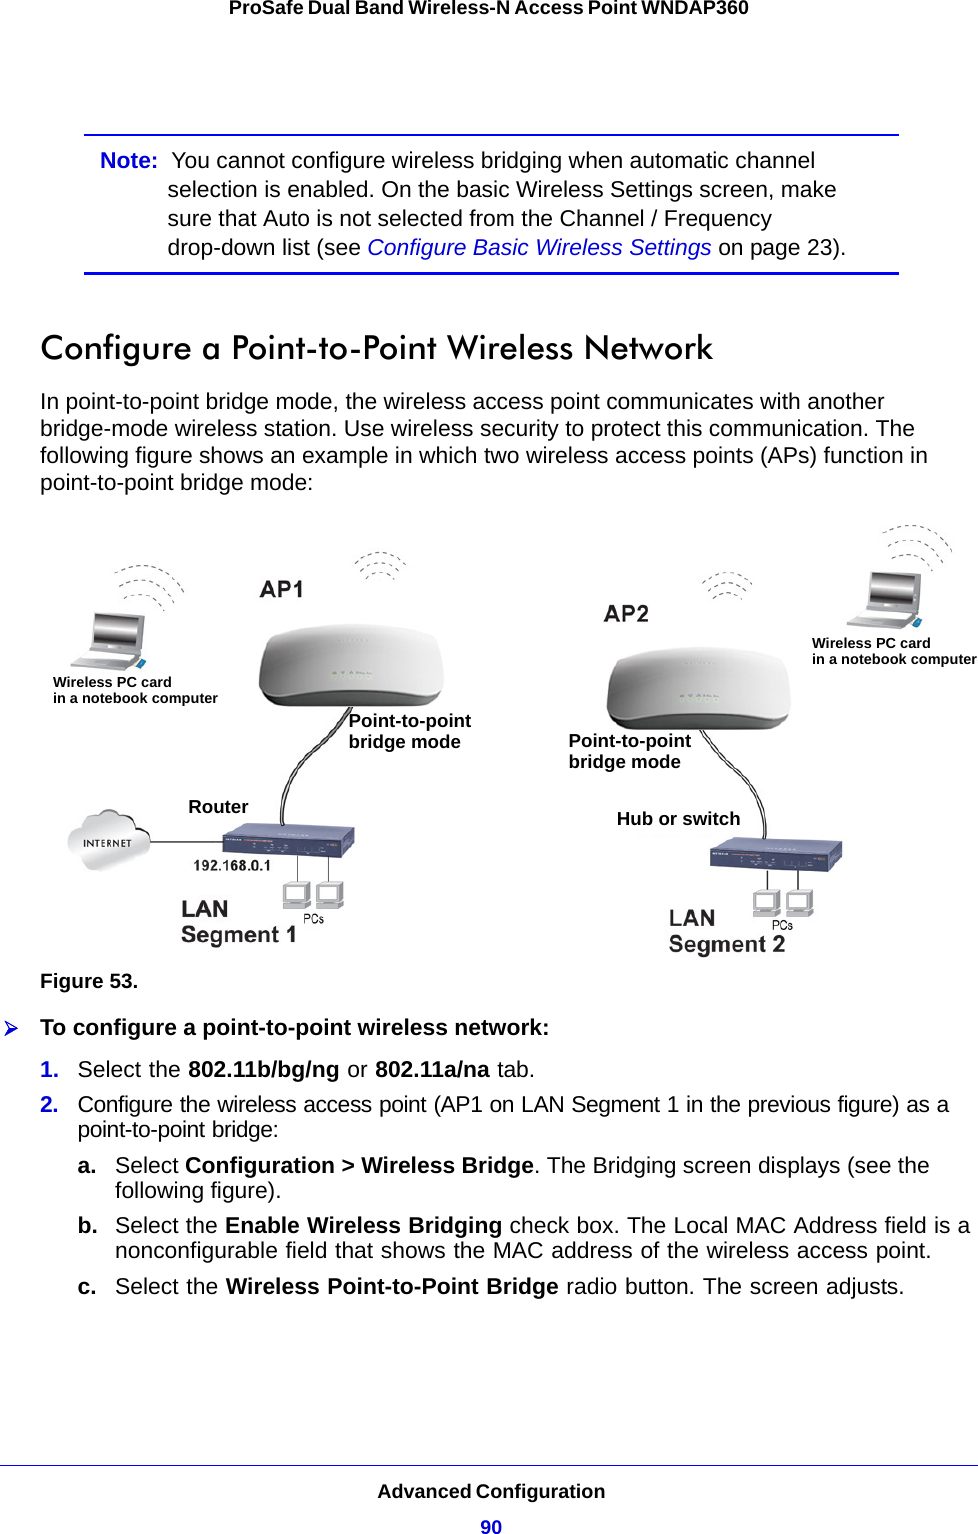 Advanced Configuration90ProSafe Dual Band Wireless-N Access Point WNDAP360 Note:  You cannot configure wireless bridging when automatic channel selection is enabled. On the basic Wireless Settings screen, make sure that Auto is not selected from the Channel / Frequency drop-down list (see Configure Basic Wireless Settings on page 23).Configure a Point-to-Point Wireless NetworkIn point-to-point bridge mode, the wireless access point communicates with another bridge-mode wireless station. Use wireless security to protect this communication. The following figure shows an example in which two wireless access points (APs) function in point-to-point bridge mode:Figure 53. To configure a point-to-point wireless network:1.  Select the 802.11b/bg/ng or 802.11a/na tab.2.  Configure the wireless access point (AP1 on LAN Segment 1 in the previous figure) as a point-to-point bridge:a. Select Configuration &gt; Wireless Bridge. The Bridging screen displays (see the following figure).b.  Select the Enable Wireless Bridging check box. The Local MAC Address field is a nonconfigurable field that shows the MAC address of the wireless access point.c.  Select the Wireless Point-to-Point Bridge radio button. The screen adjusts.Wireless PC cardin a notebook computerWireless PC cardin a notebook computerPoint-to-pointbridge mode Point-to-pointbridge modeRouter Hub or switch